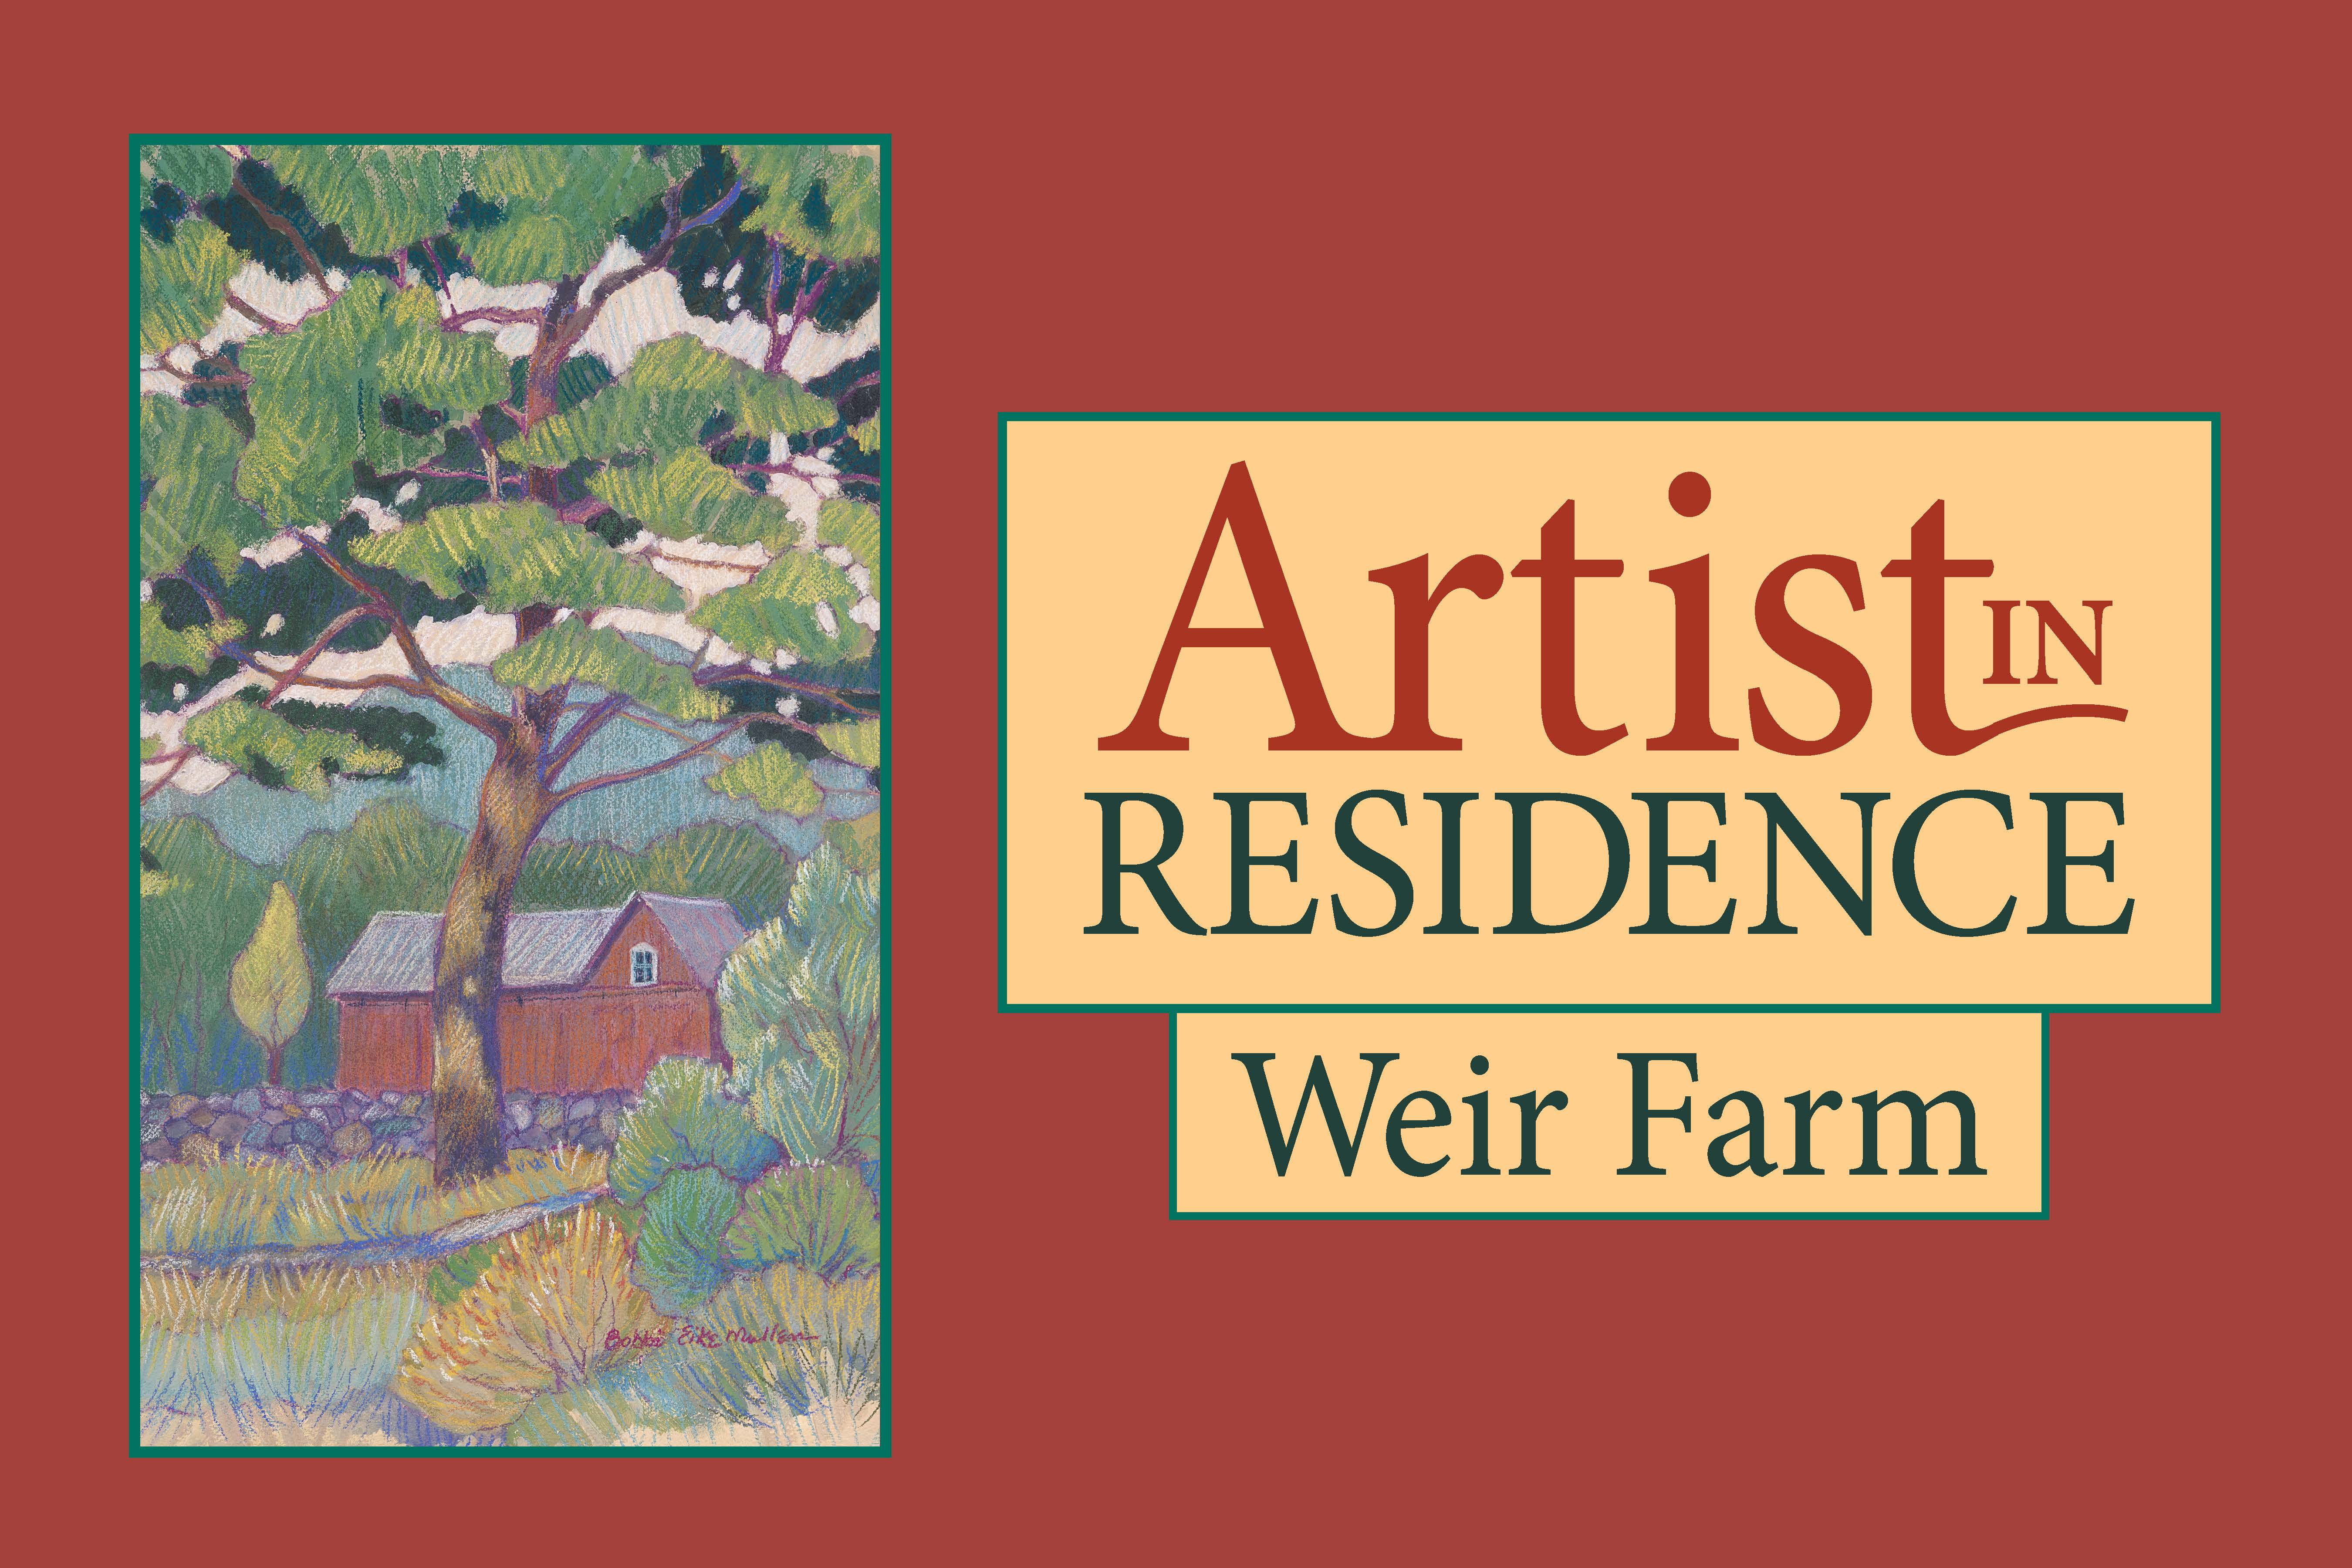 Weir Farm National Historical Park Artist-in-Residence Program Logo: Red background with painting of AIR Studio and trees on the lefthand side and the words 'Artist in Residence Weir Farm' on the right